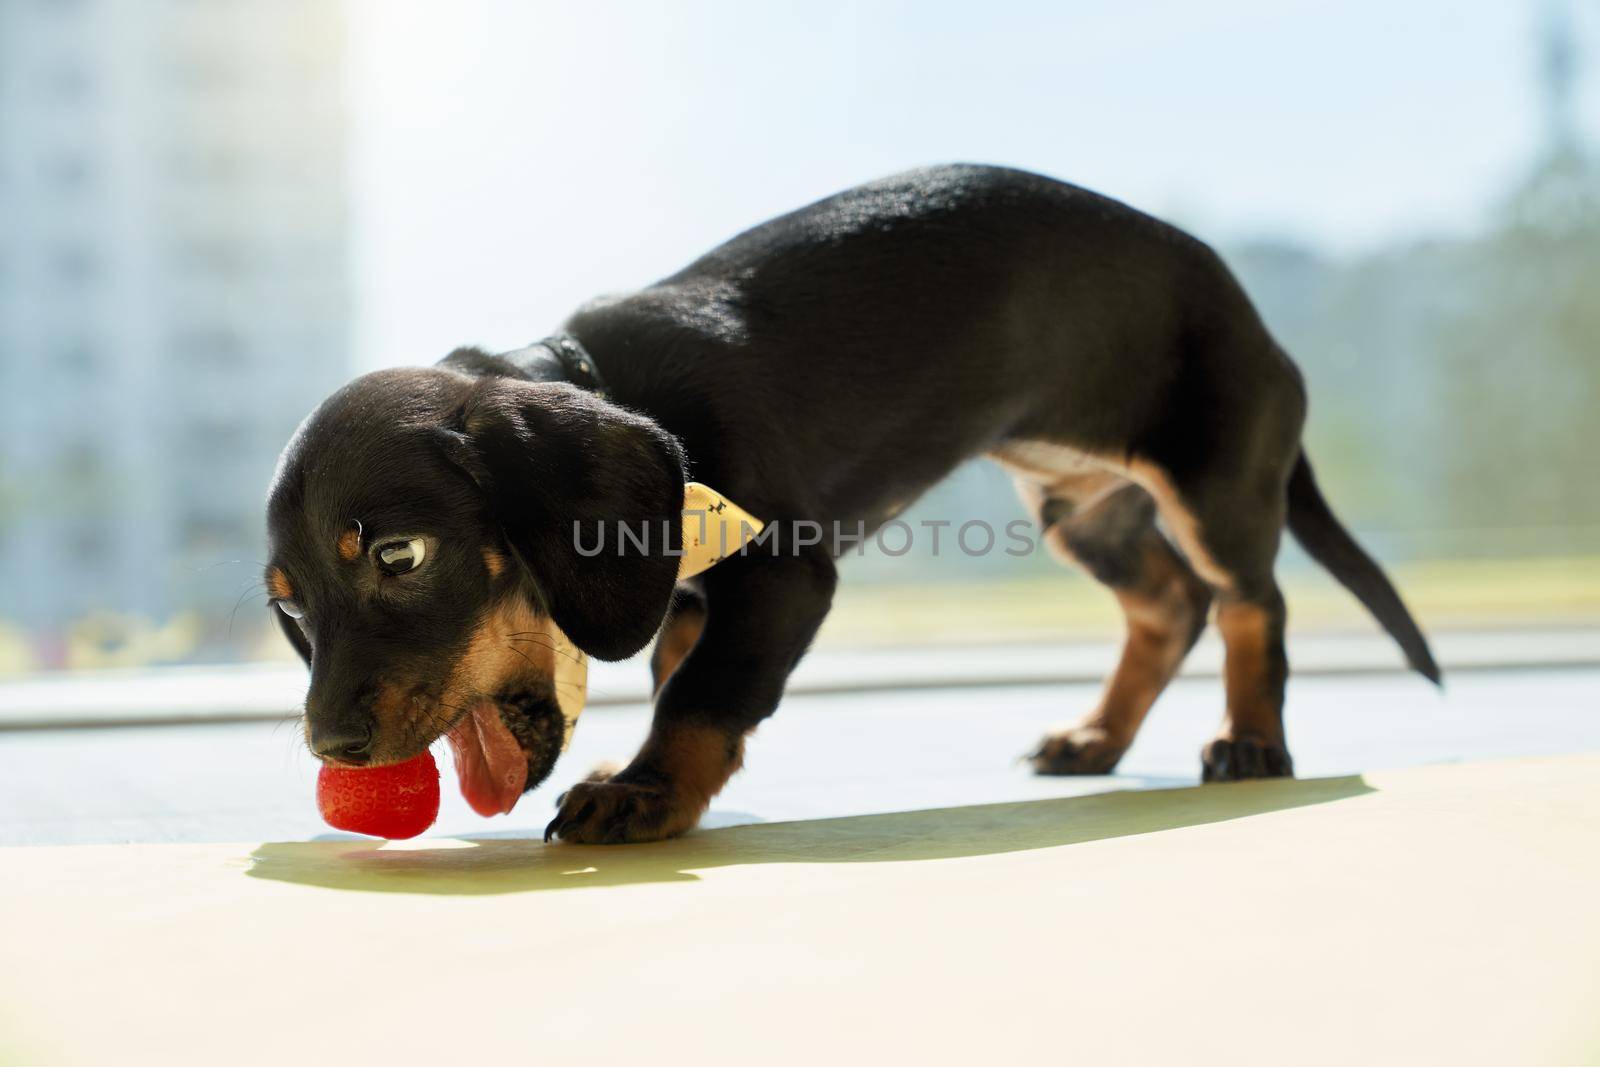 Side view of black, little dachshund puppy with brown paws and neck standing, biting strawberry. Cute, funny dog eating, playing, wearing stylish collar. Concept of animals.